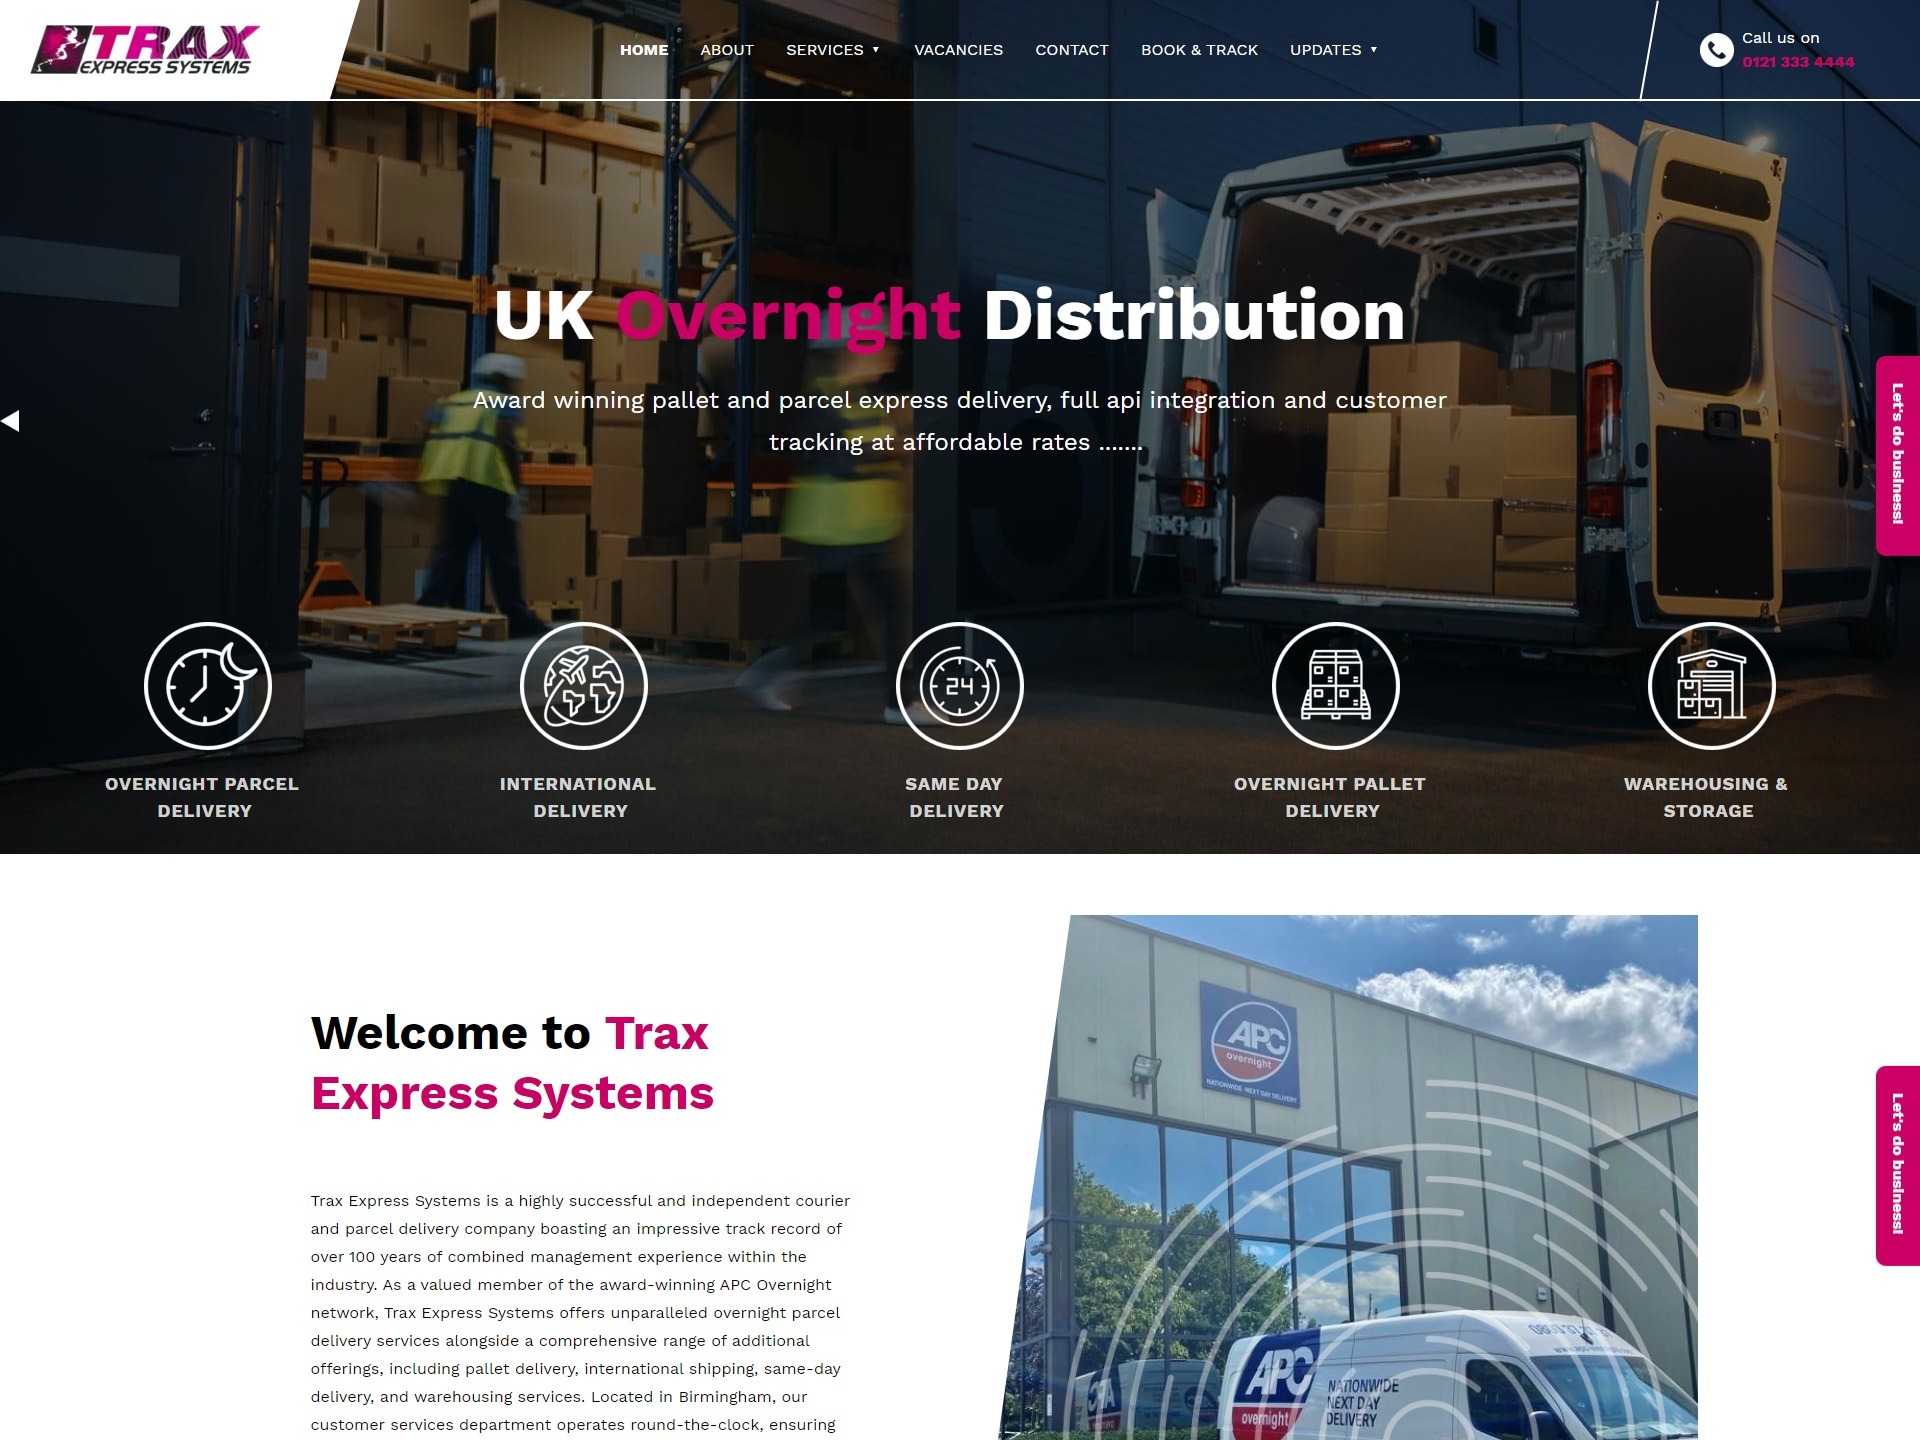 The new Trax Express Systems website design